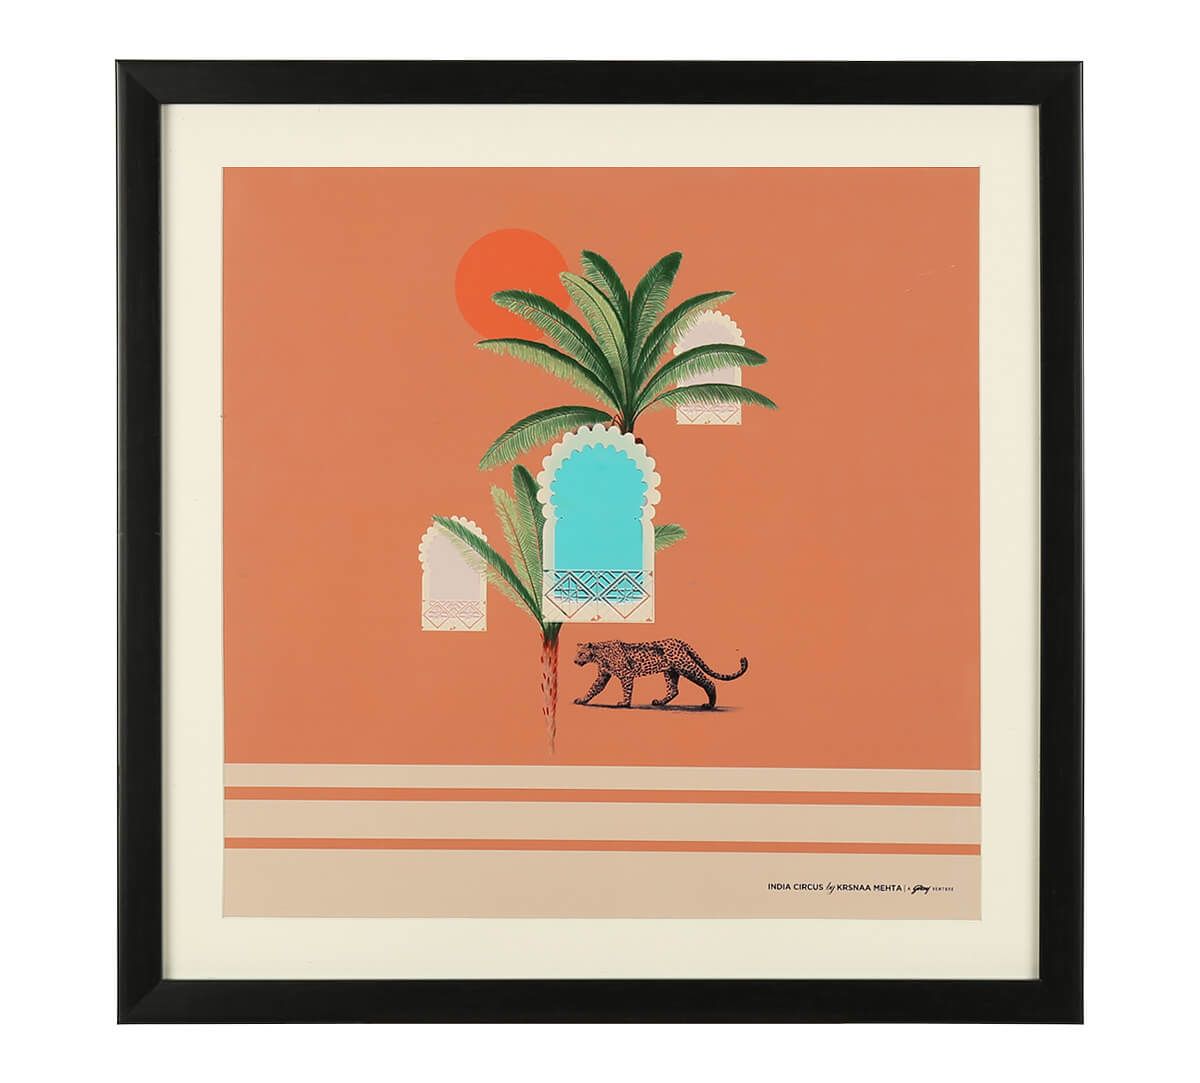 India Circus by Krsnaa Mehta Scenic Landscapes Framed Wall Art